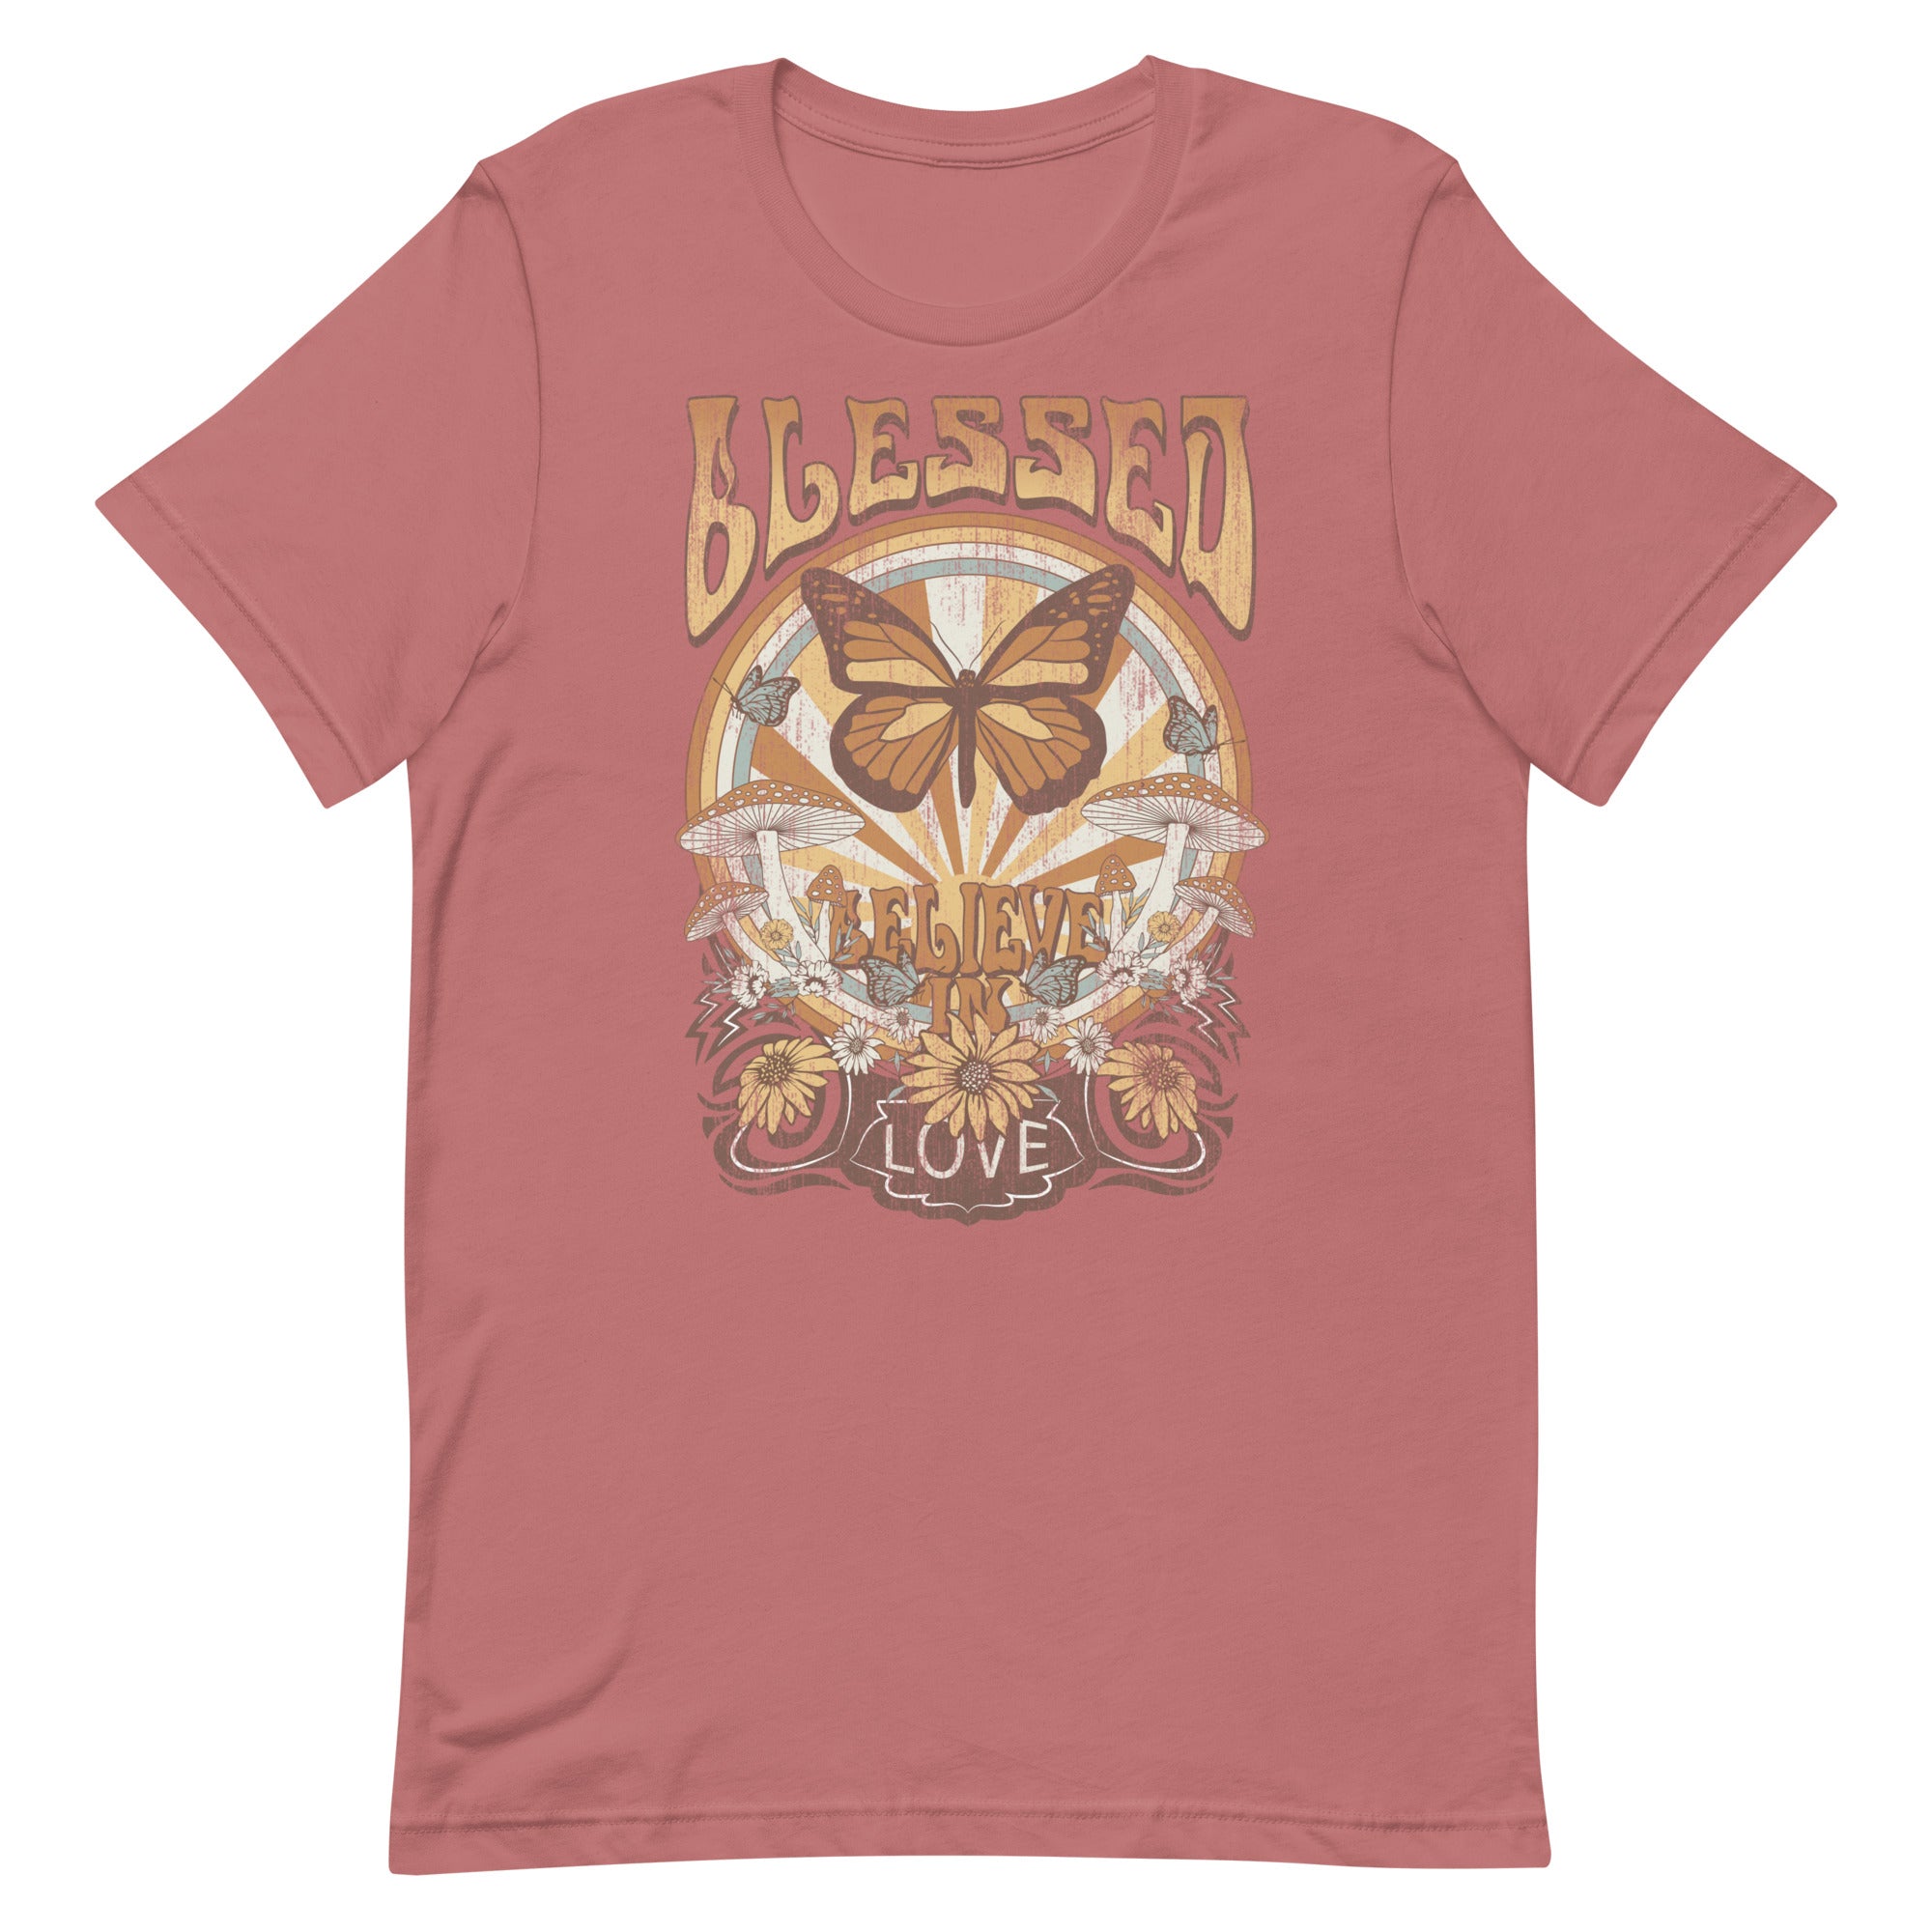 Blessed - Believe In Love Graphic Tee